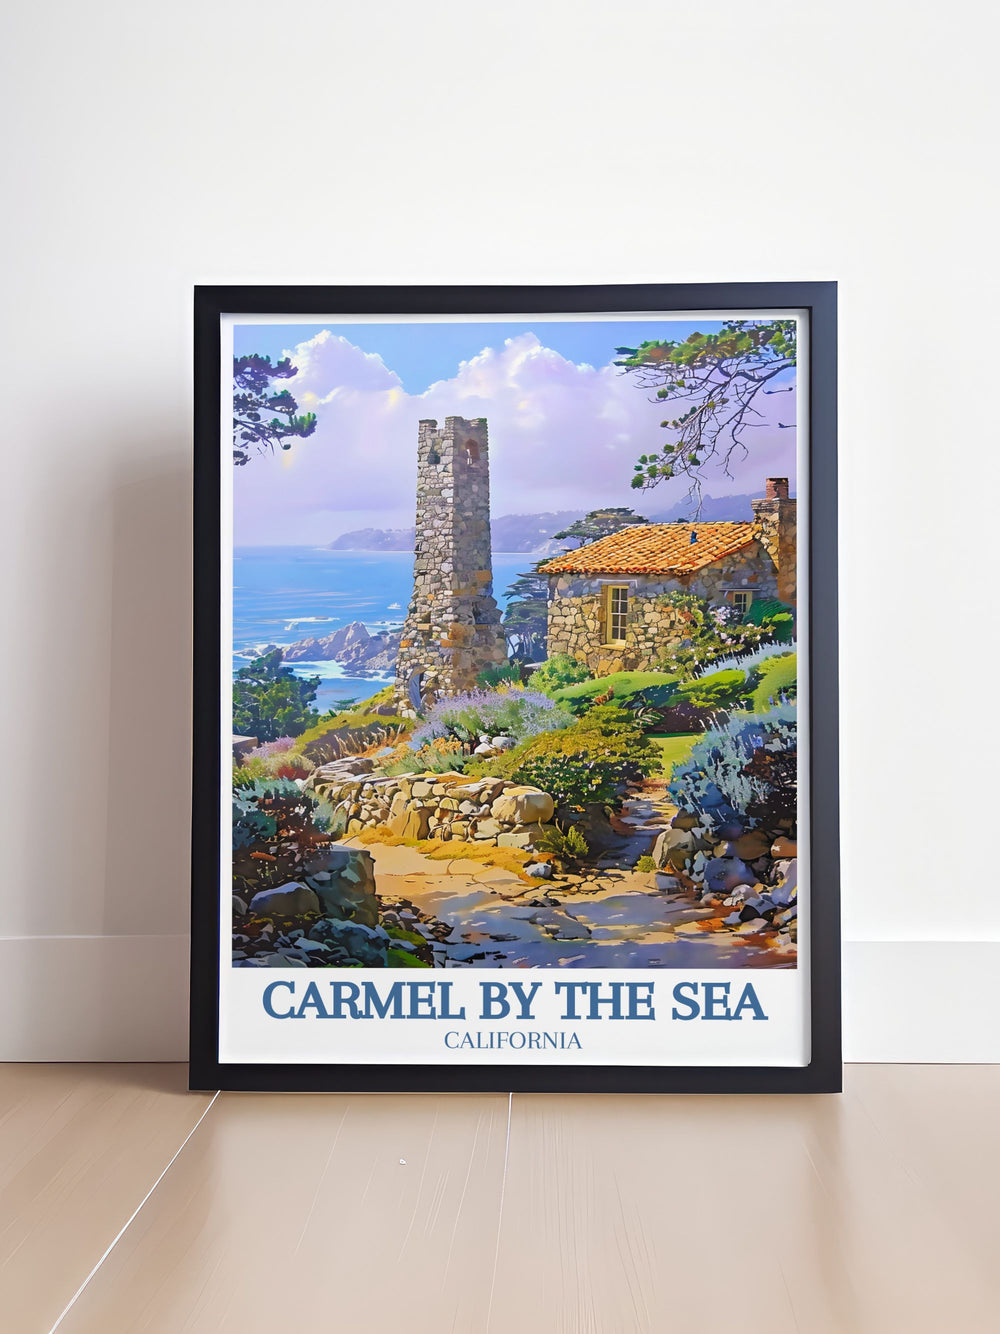 This travel poster beautifully depicts the charm of Carmel by the Sea, with its picturesque streets and vibrant art scene, making it an ideal piece for art lovers and collectors. Bring the storybook charm of Carmel into your home with this stunning print.